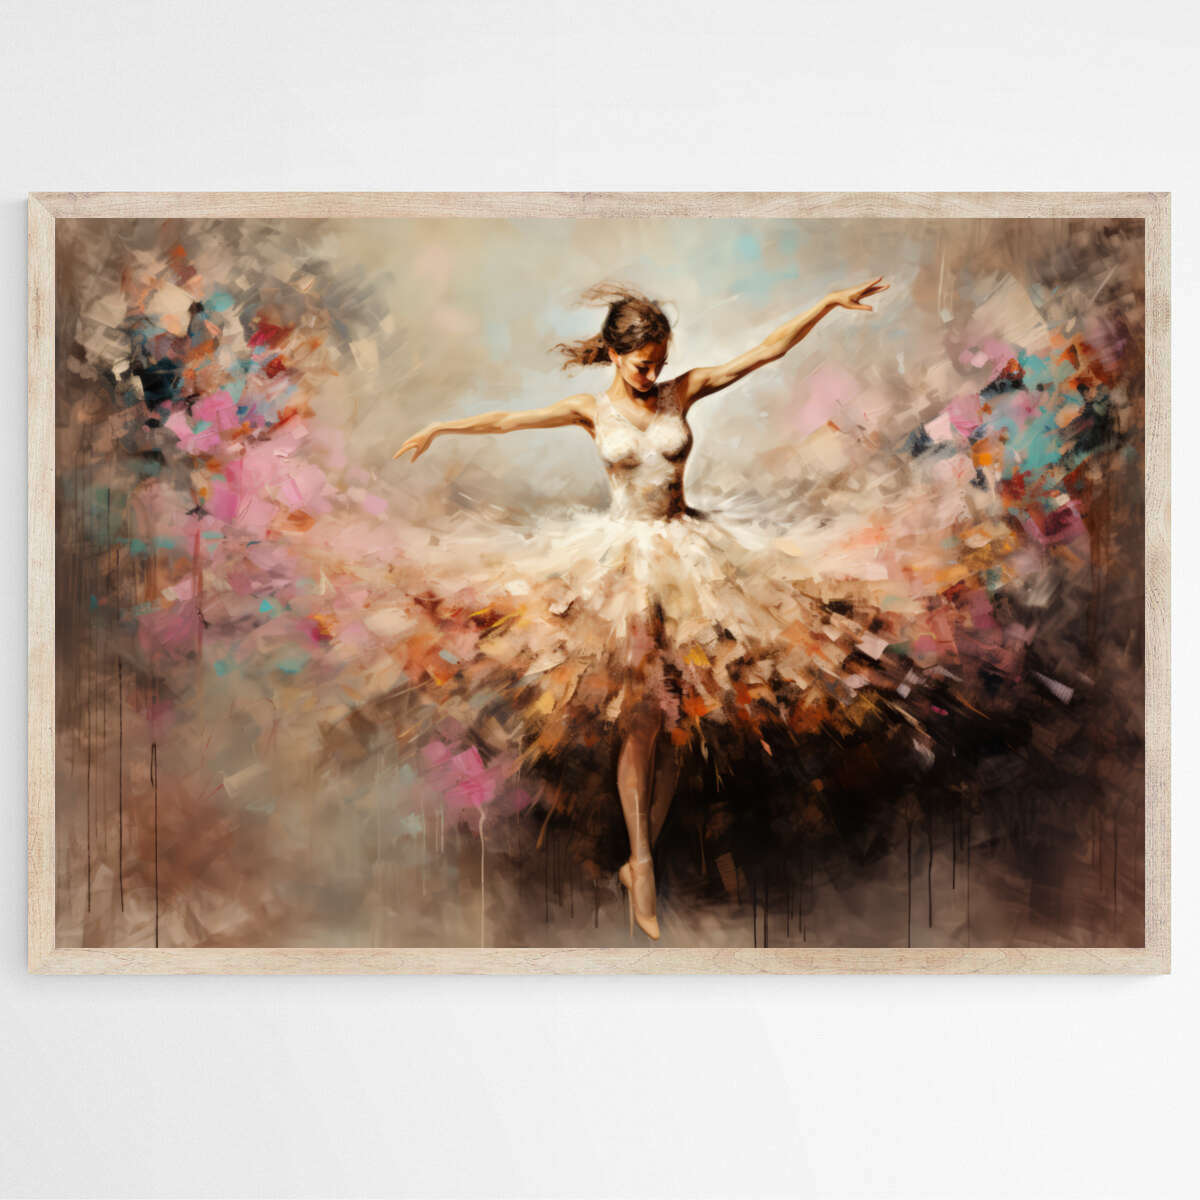 Contemporary Ballet Dancer | Abstract Wall Art Prints - The Canvas Hive